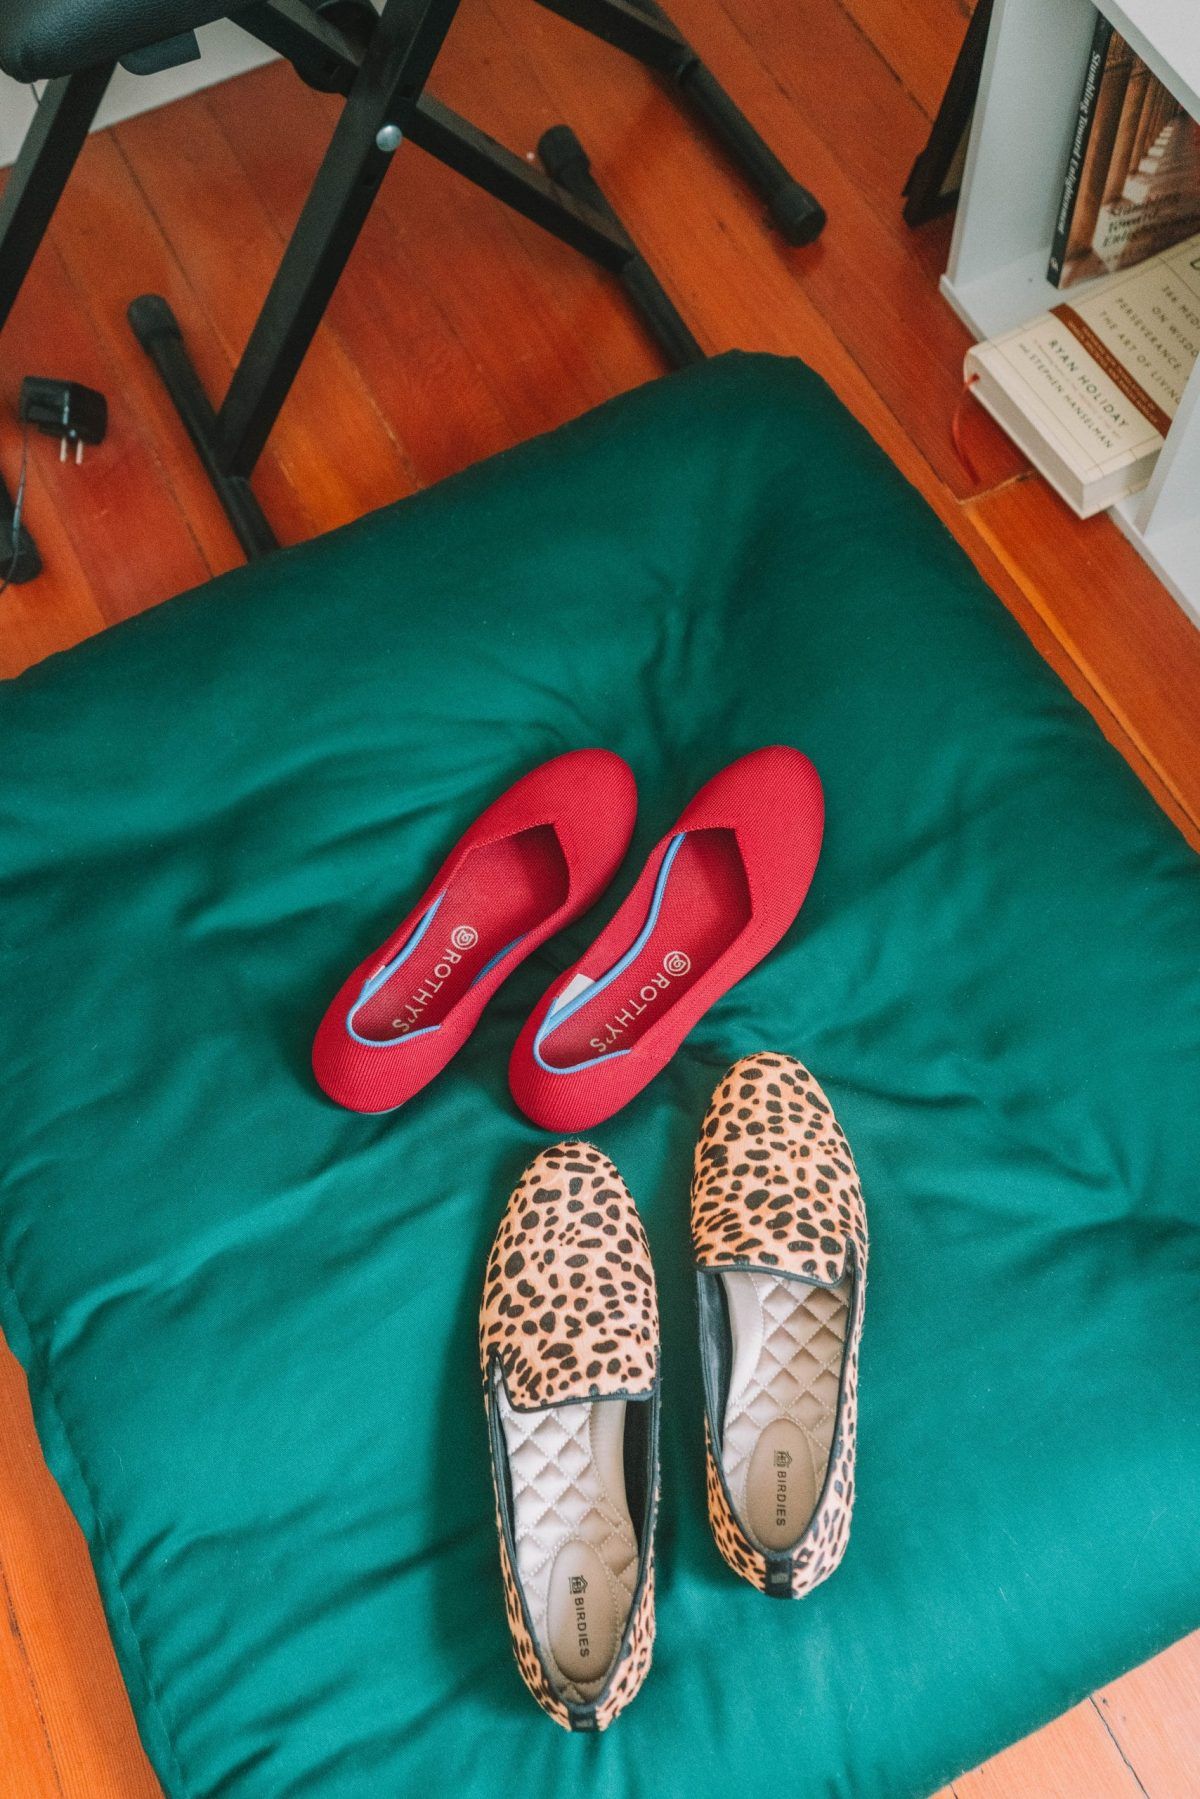 A photo comparing Rothys vs Birdies shoes, with a pair of red Rothys flats and a pair of cheetah-print Birdies flats sitting on a dark green pillow.